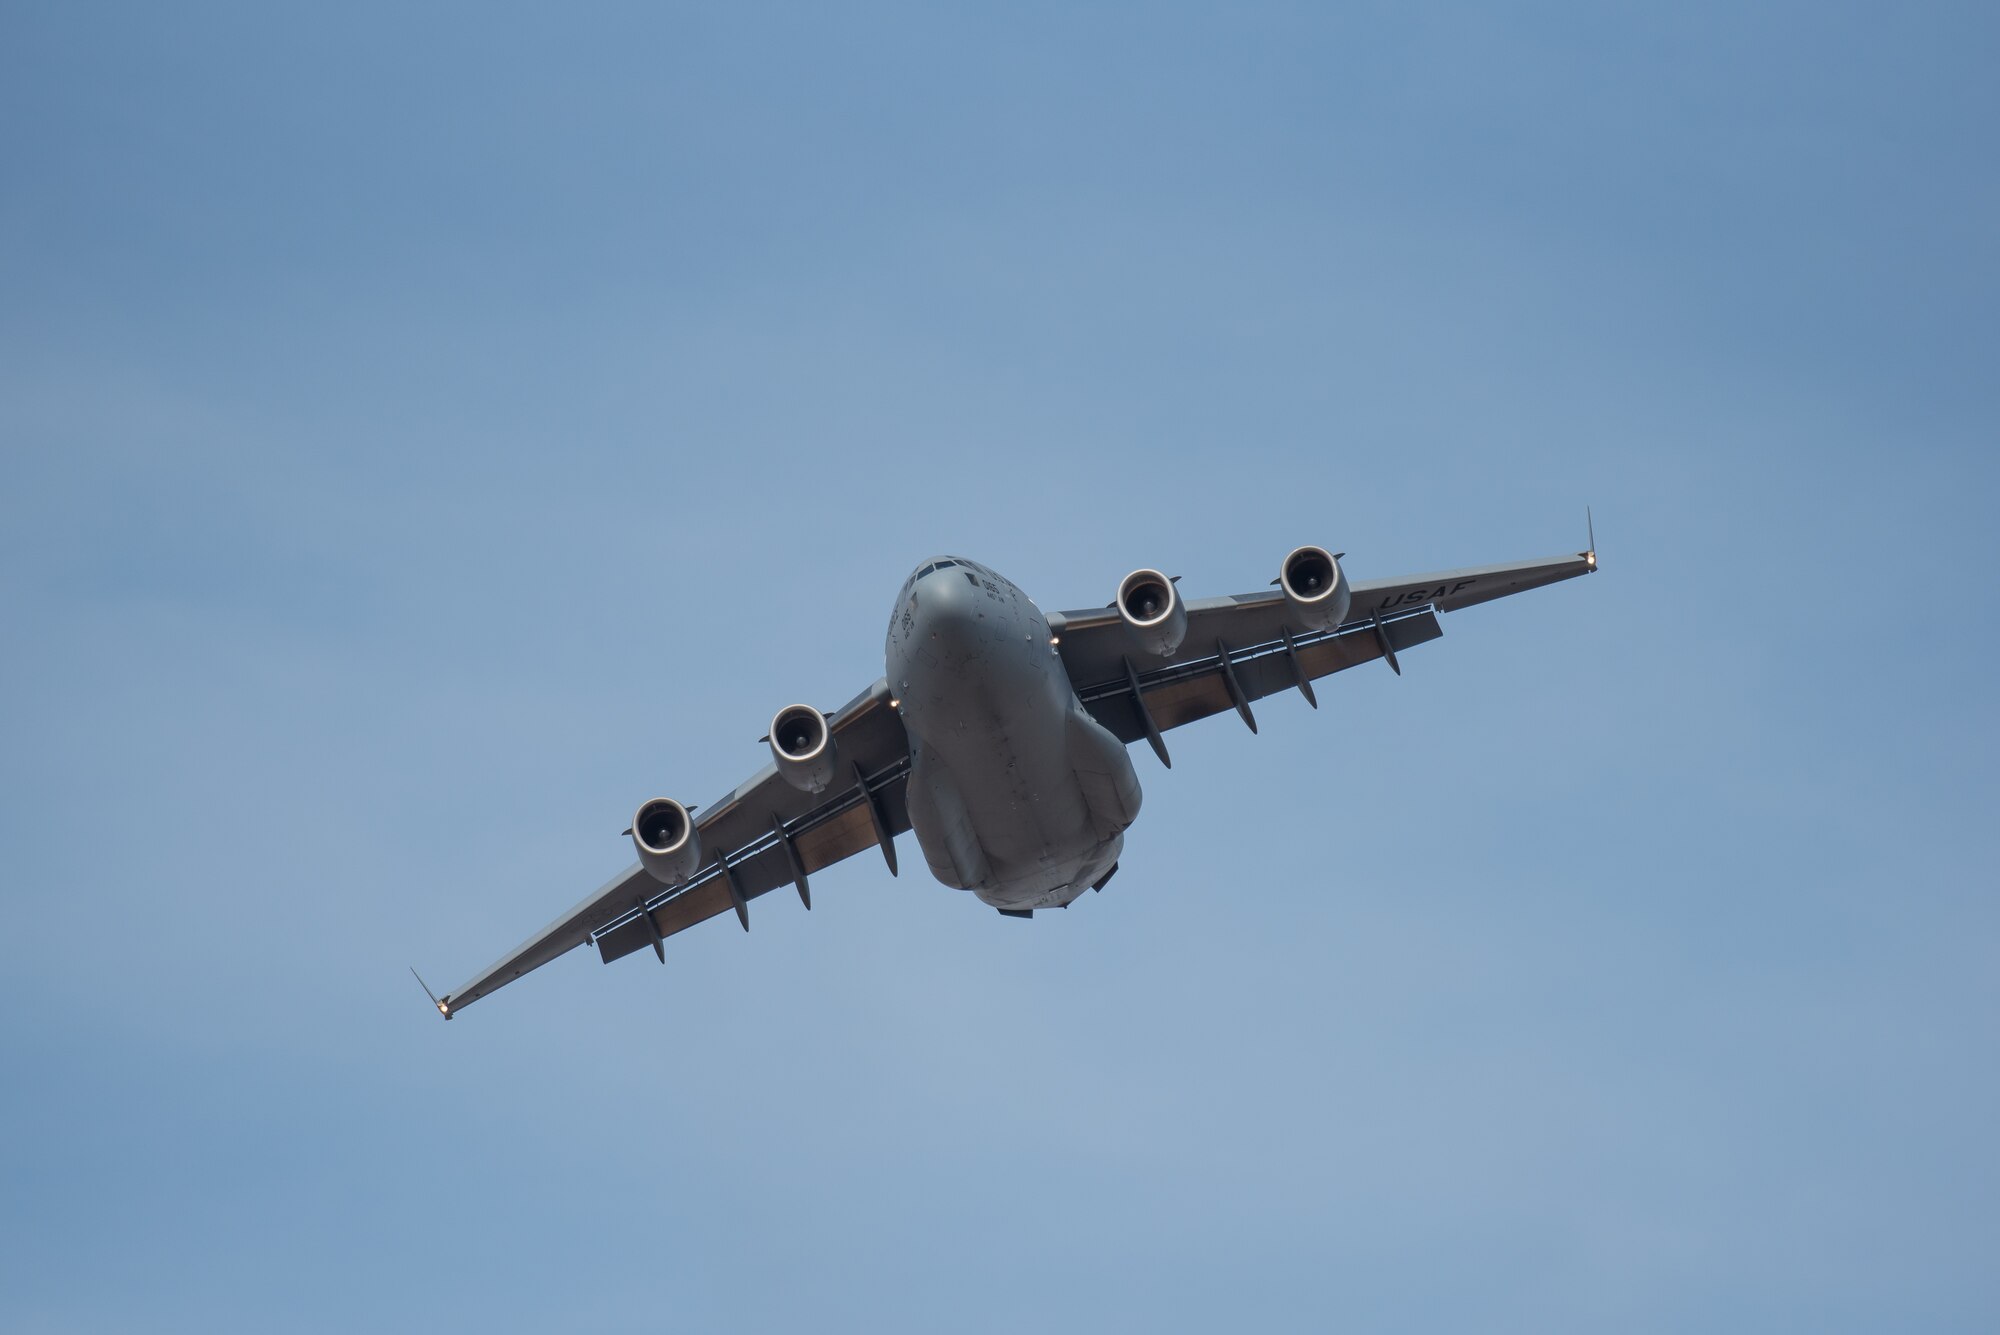 A U.S. Air Force C-17 Globemaster III transport aircraft flies an aerial demonstration over the Ohio River April 21, 2018, during the Thunder Over Louisville air show in Louisville, Ky. The Kentucky Air National Guard once again served as the base of operations for military aircraft participating in the show, providing essential maintenance and logistical support. (U.S. Air National Guard photo by Lt. Col. Dale Greer)